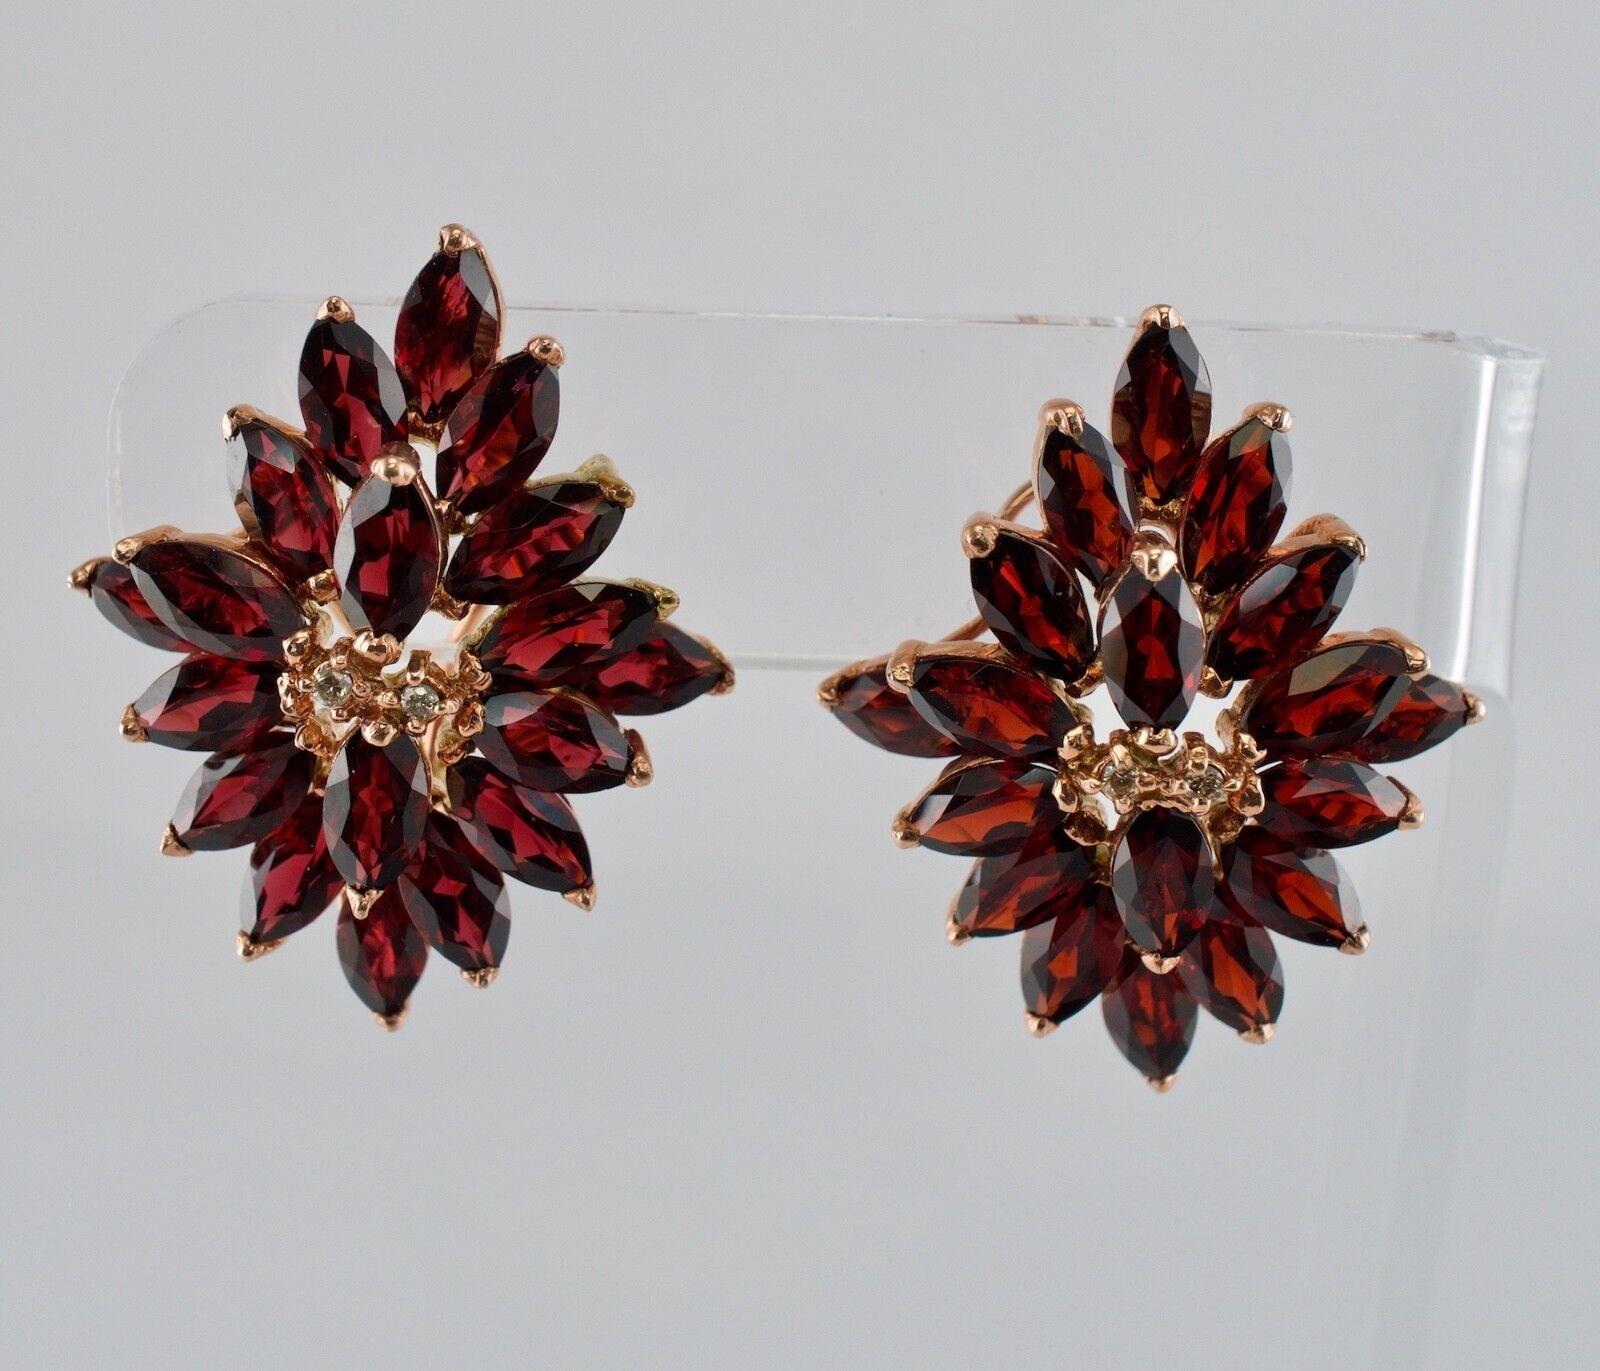 Red Garnet Diamond Earrings Flower 14K Rose Gold Vintage

This beautiful pair of earrings vintage is finely crafted in solid 14K Rose Gold and set with cleanest genuine Earth mined Garnets and Diamonds. Each earring holds nineteen marquise cut